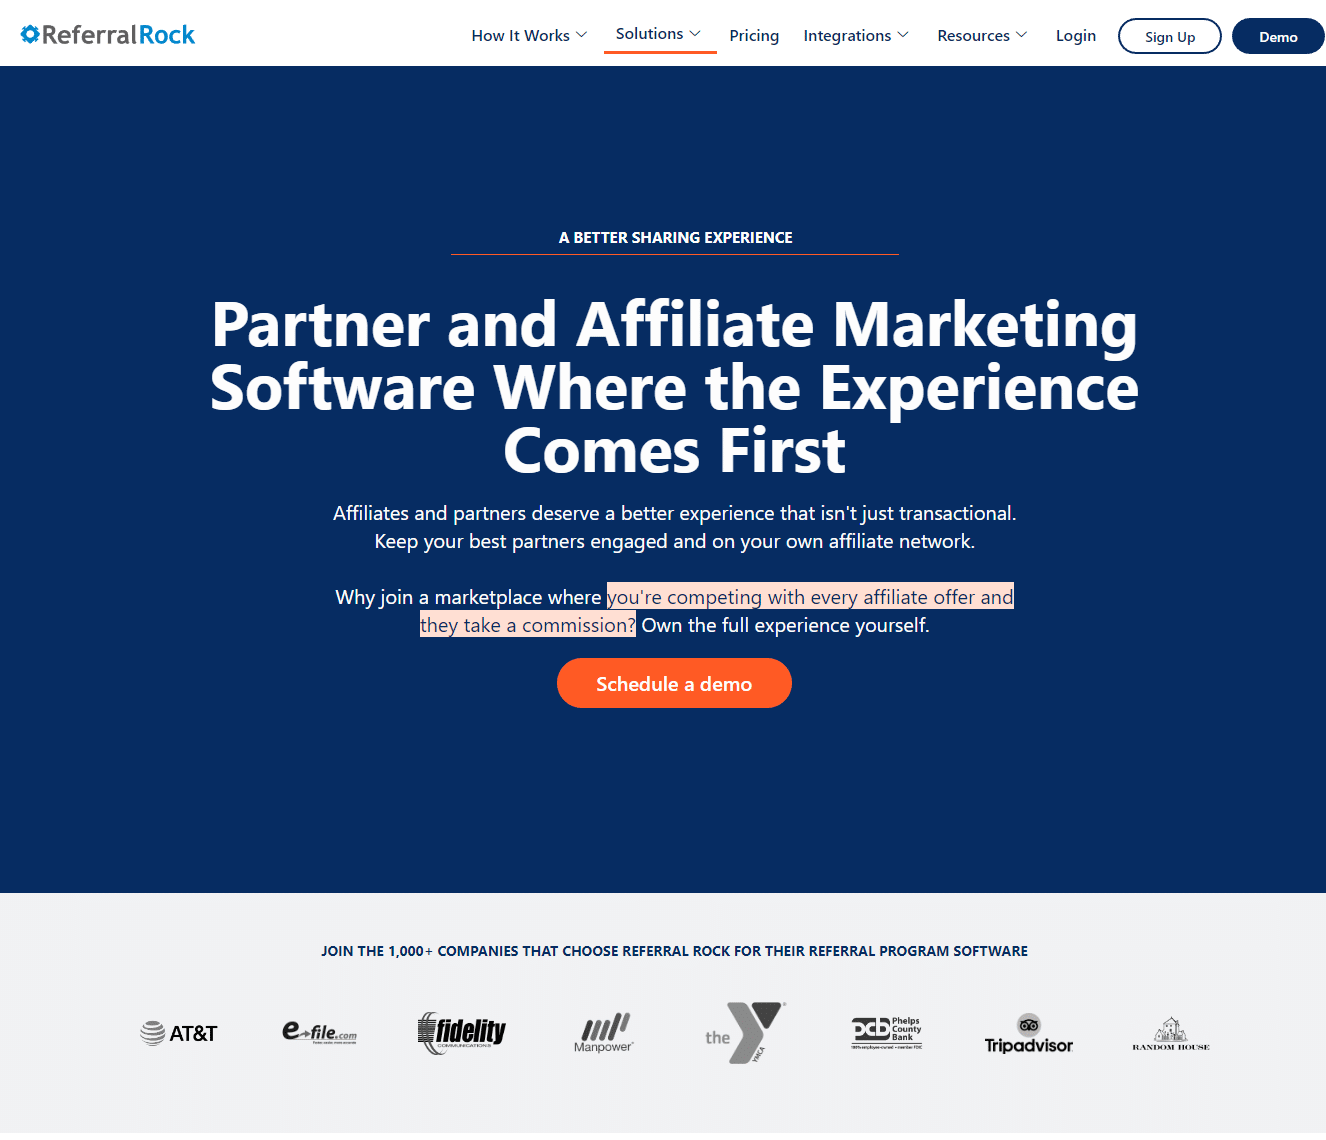 referral rock affiliate software page: The experience comes first